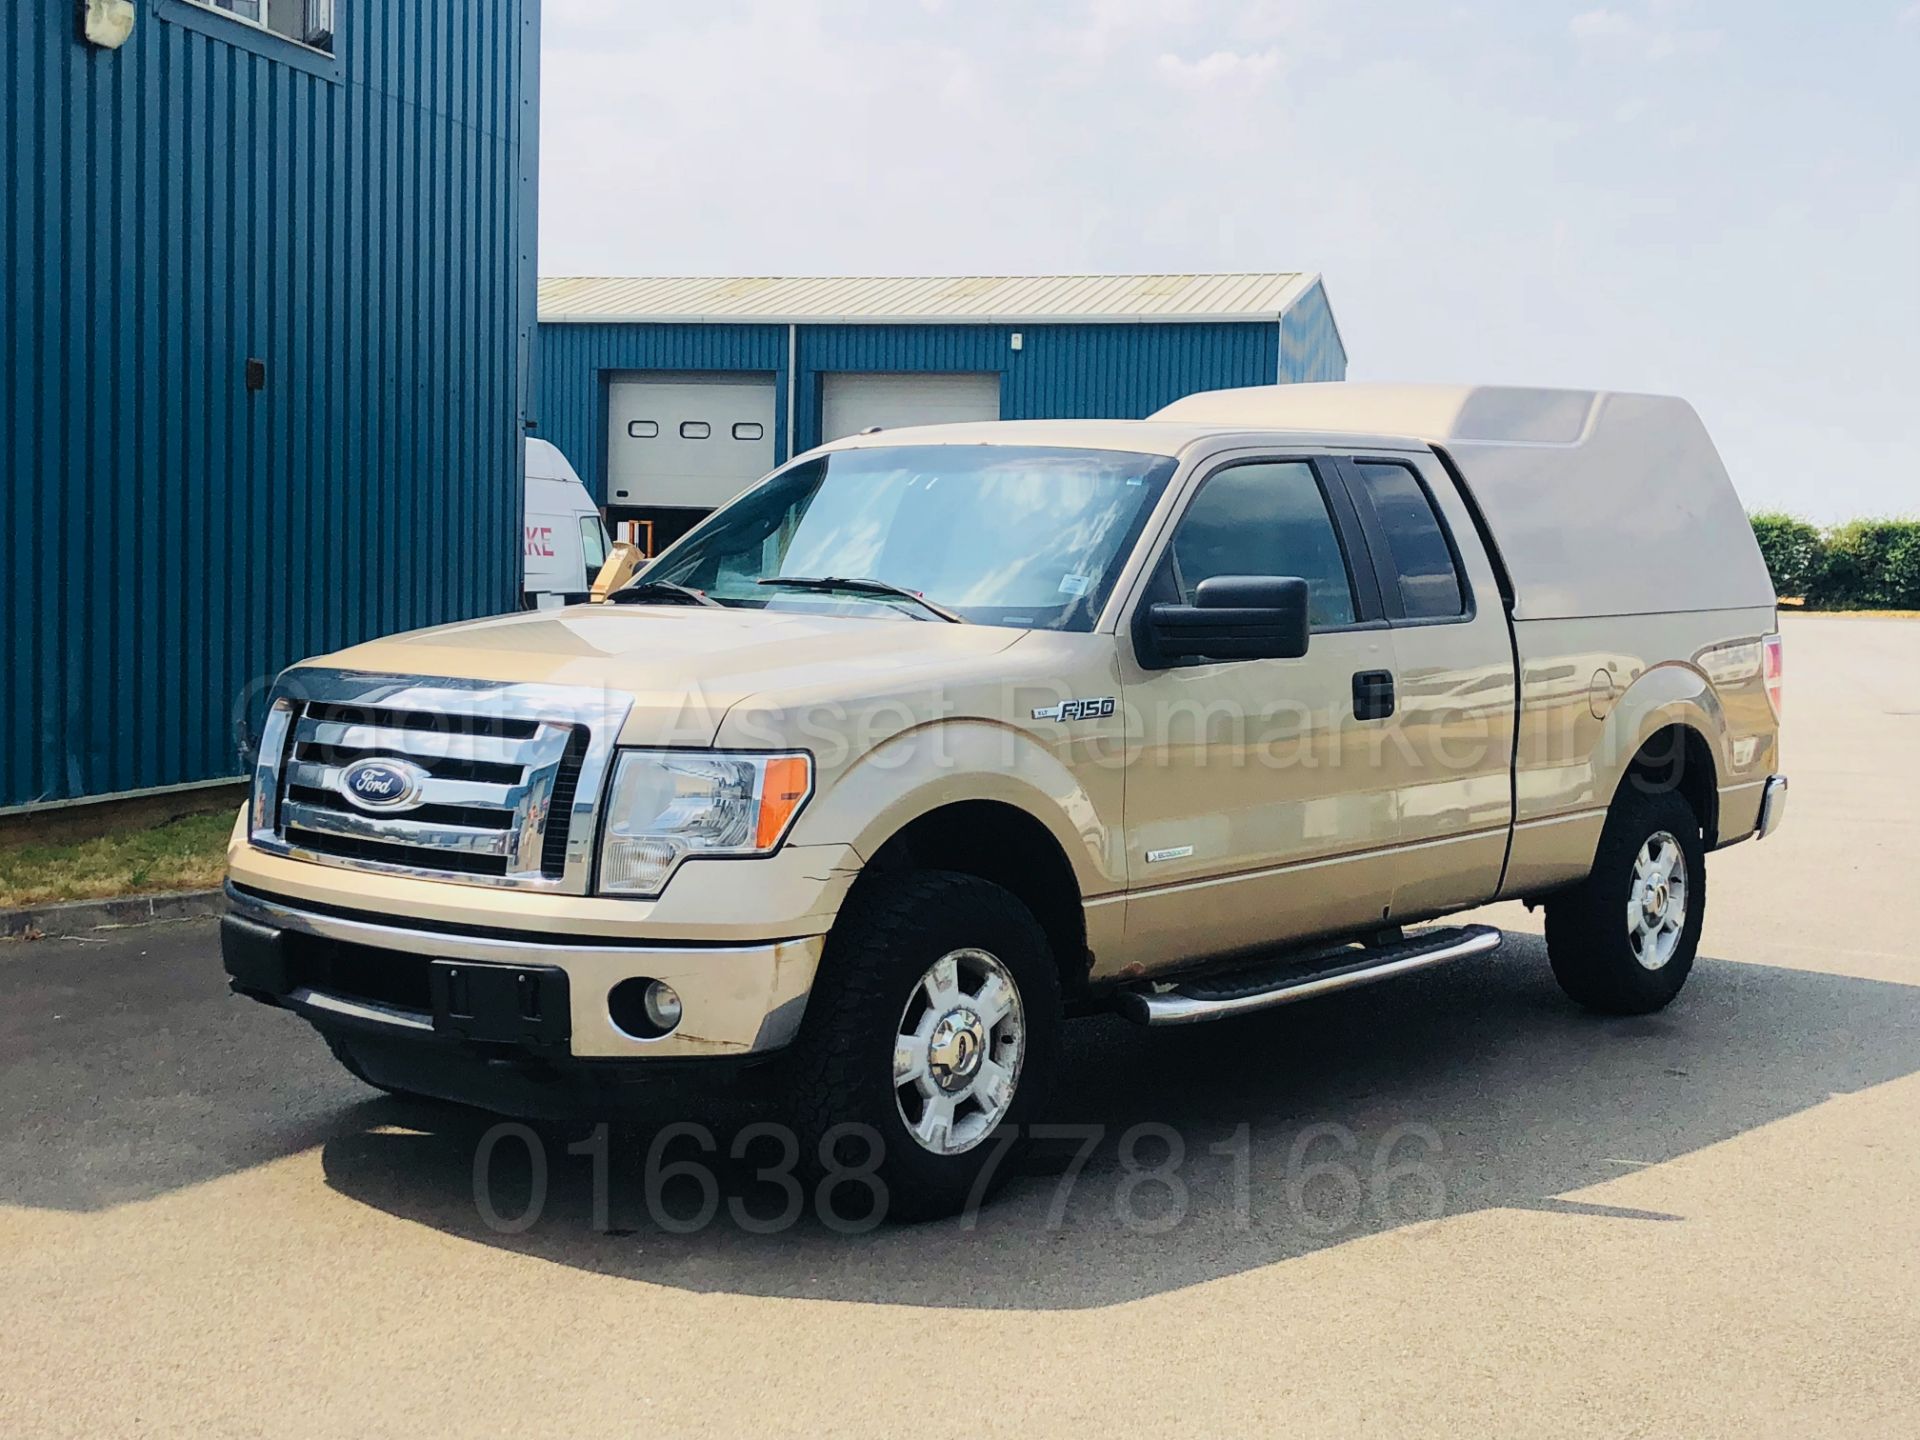 (On Sale) FORD F-150 5.4 V8 XLT EDITION KING-CAB (2012) MODEL**4X4**6 SEATER**AUTOMATIC *TOP SPEC* - Image 2 of 52